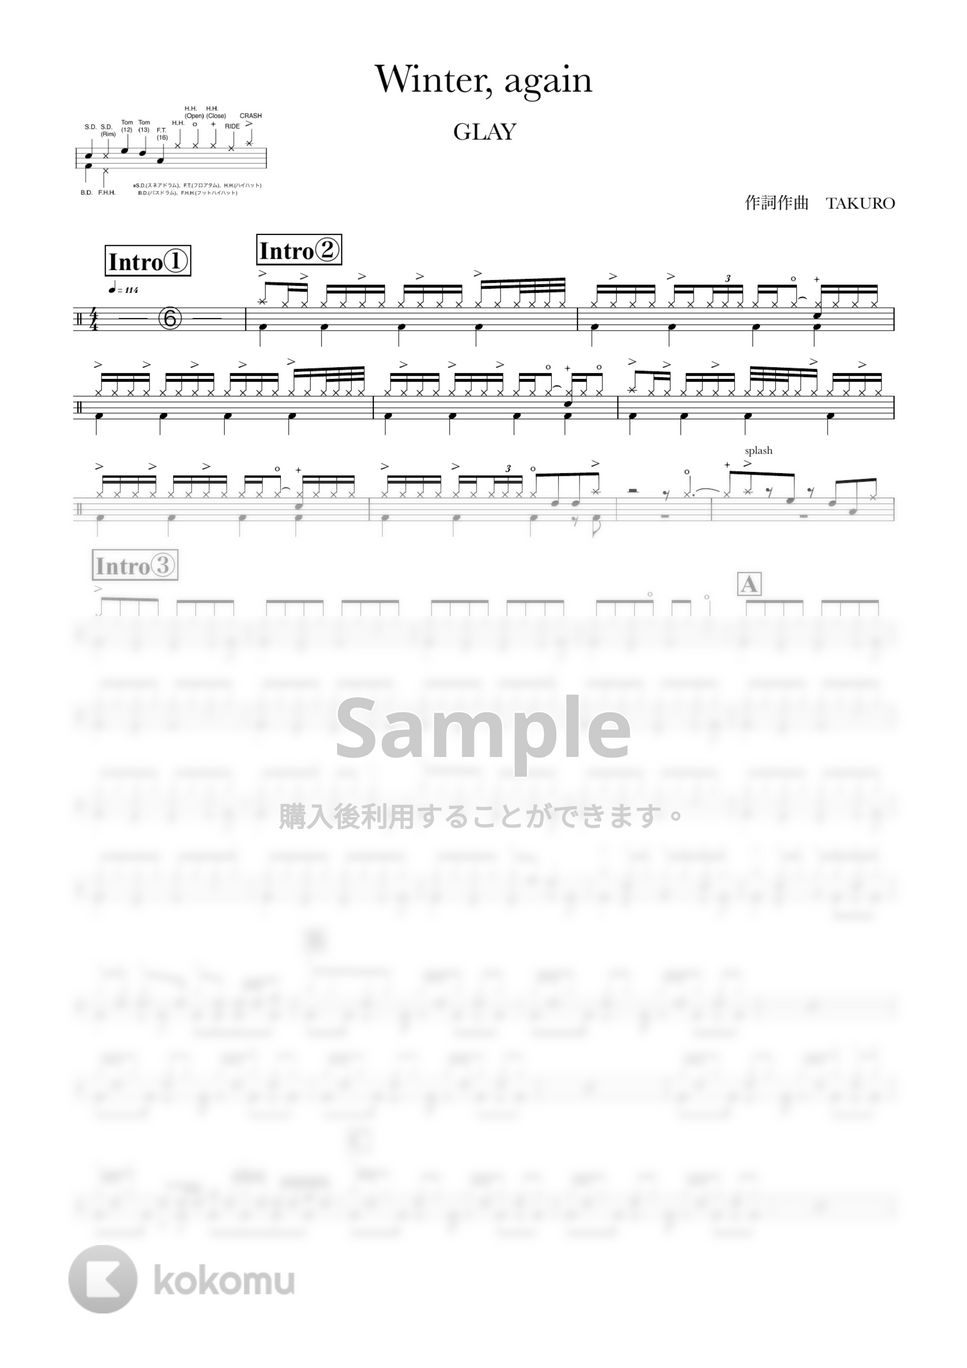 GLAY - Winter, again by ONEDRUMS